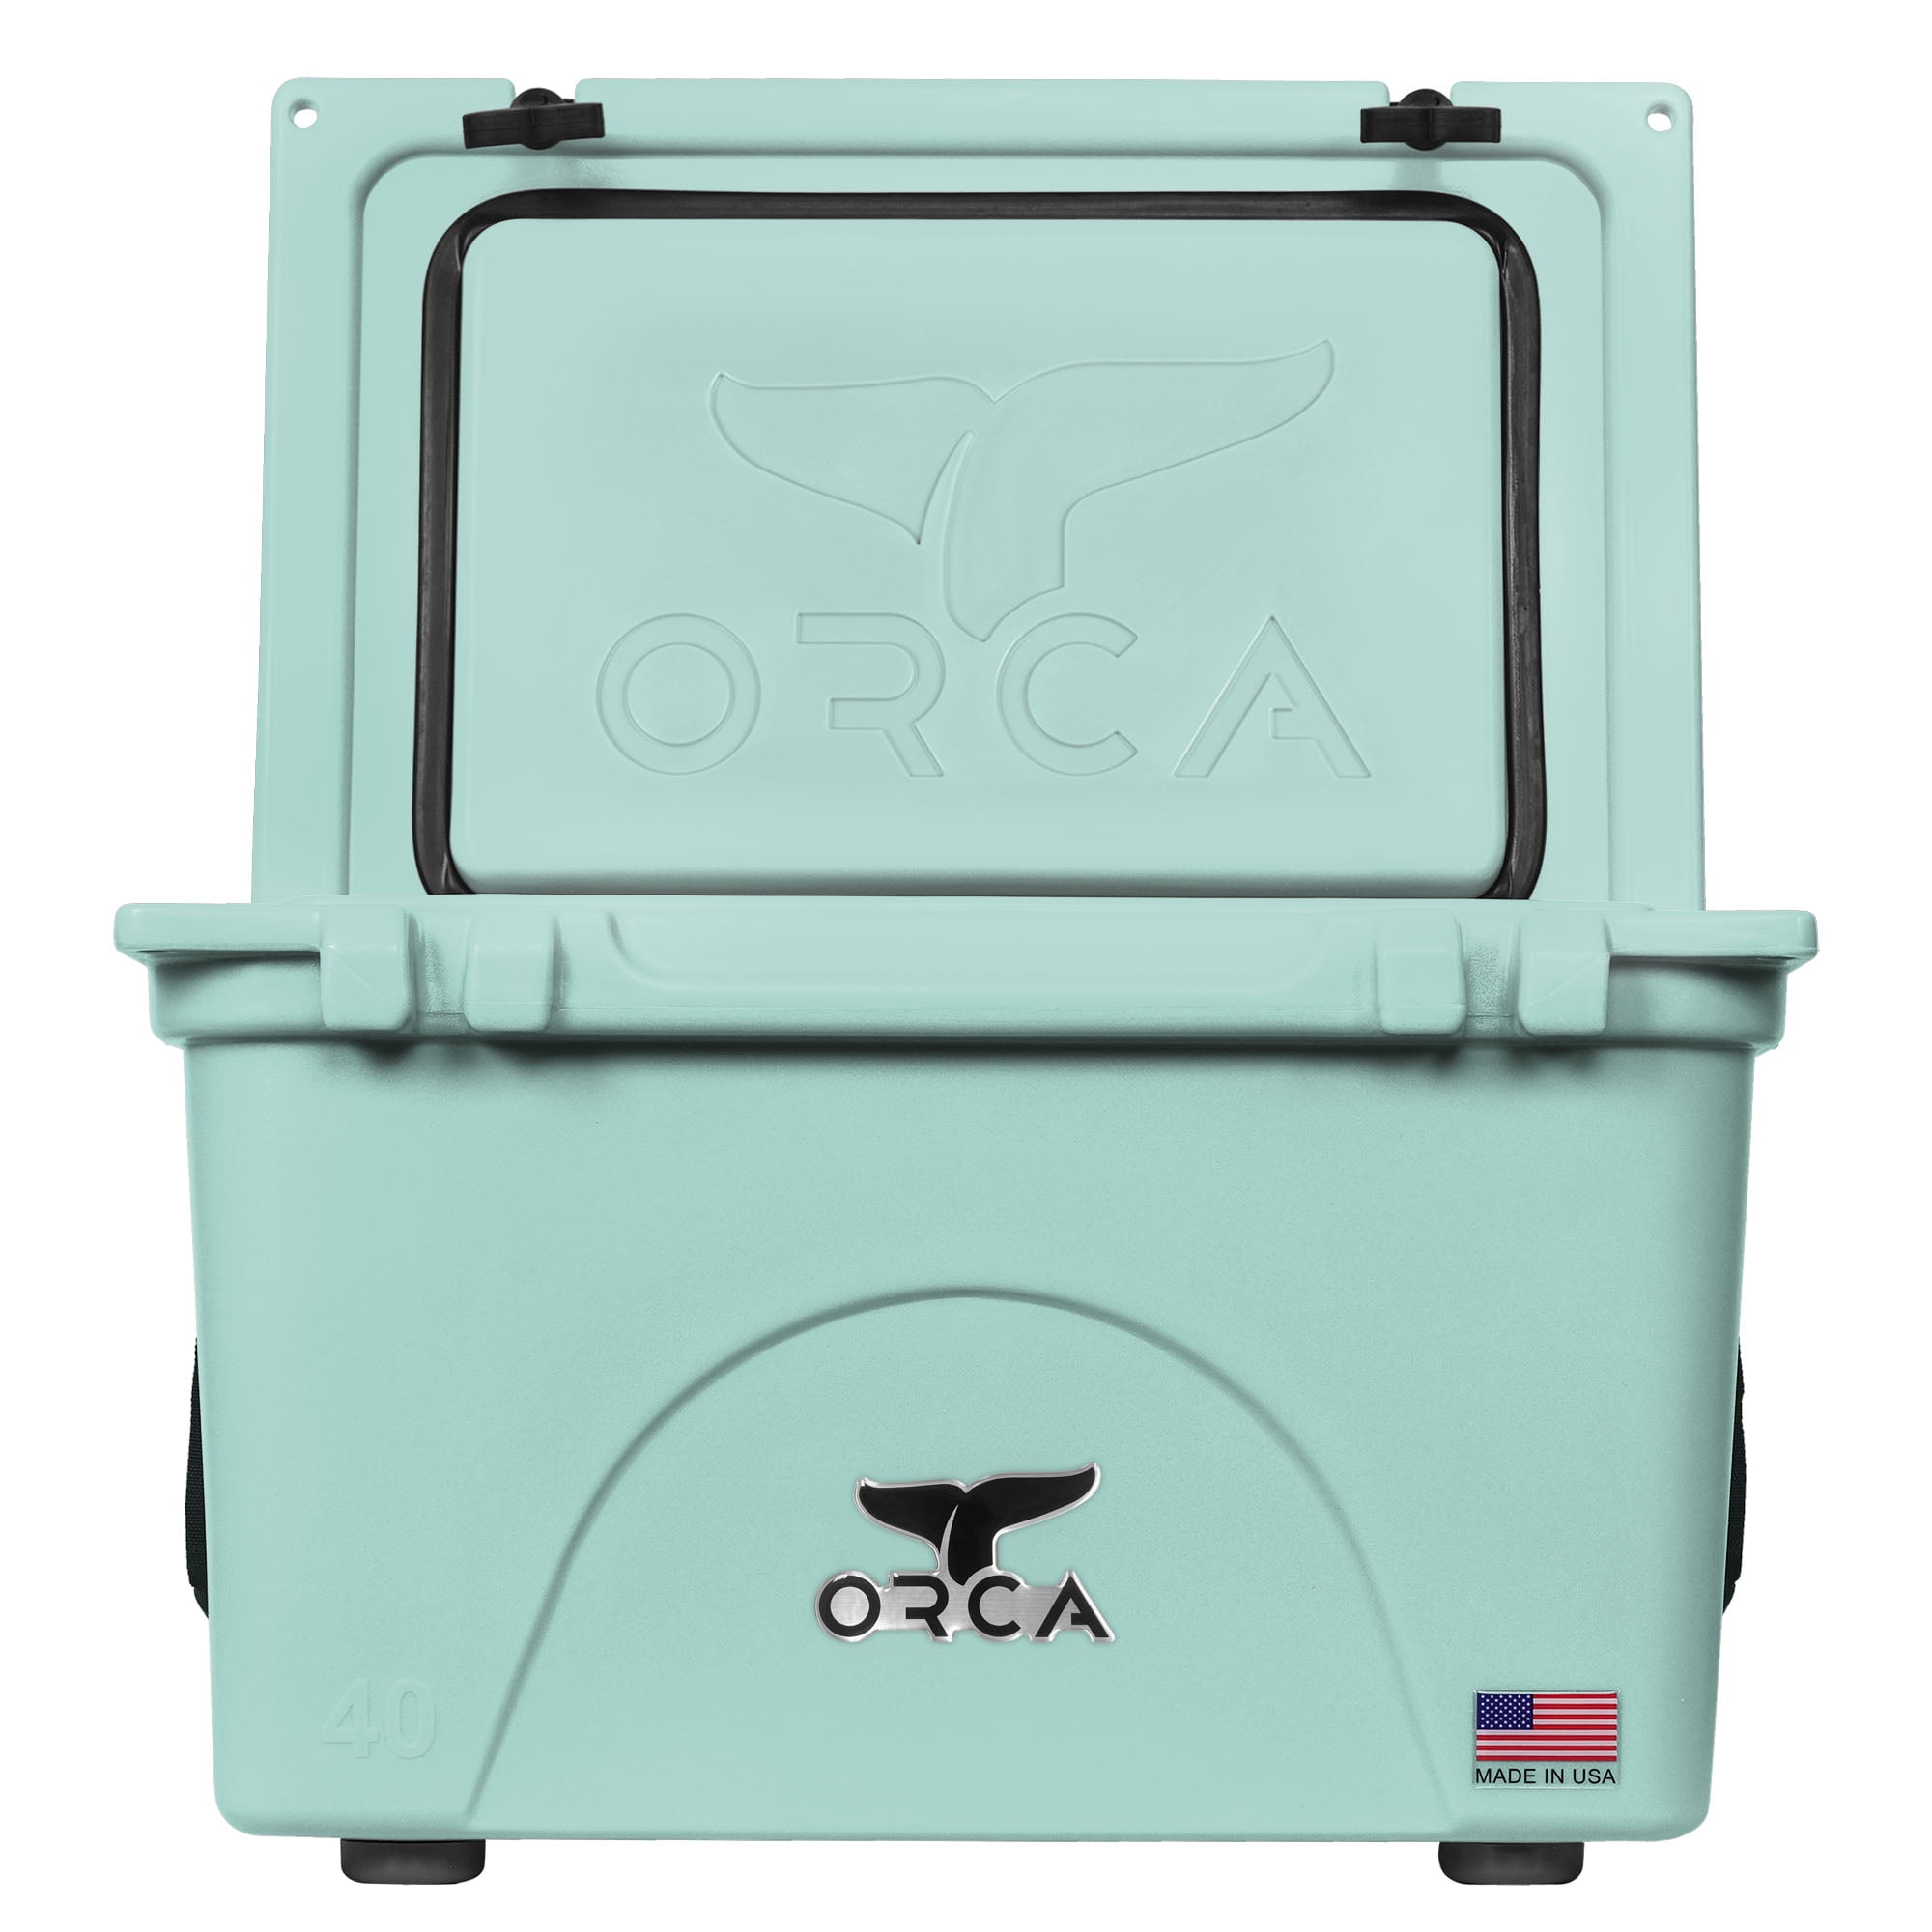 Up to 200 hours of ice cold beer with the ORCA 40 Quart Cooler